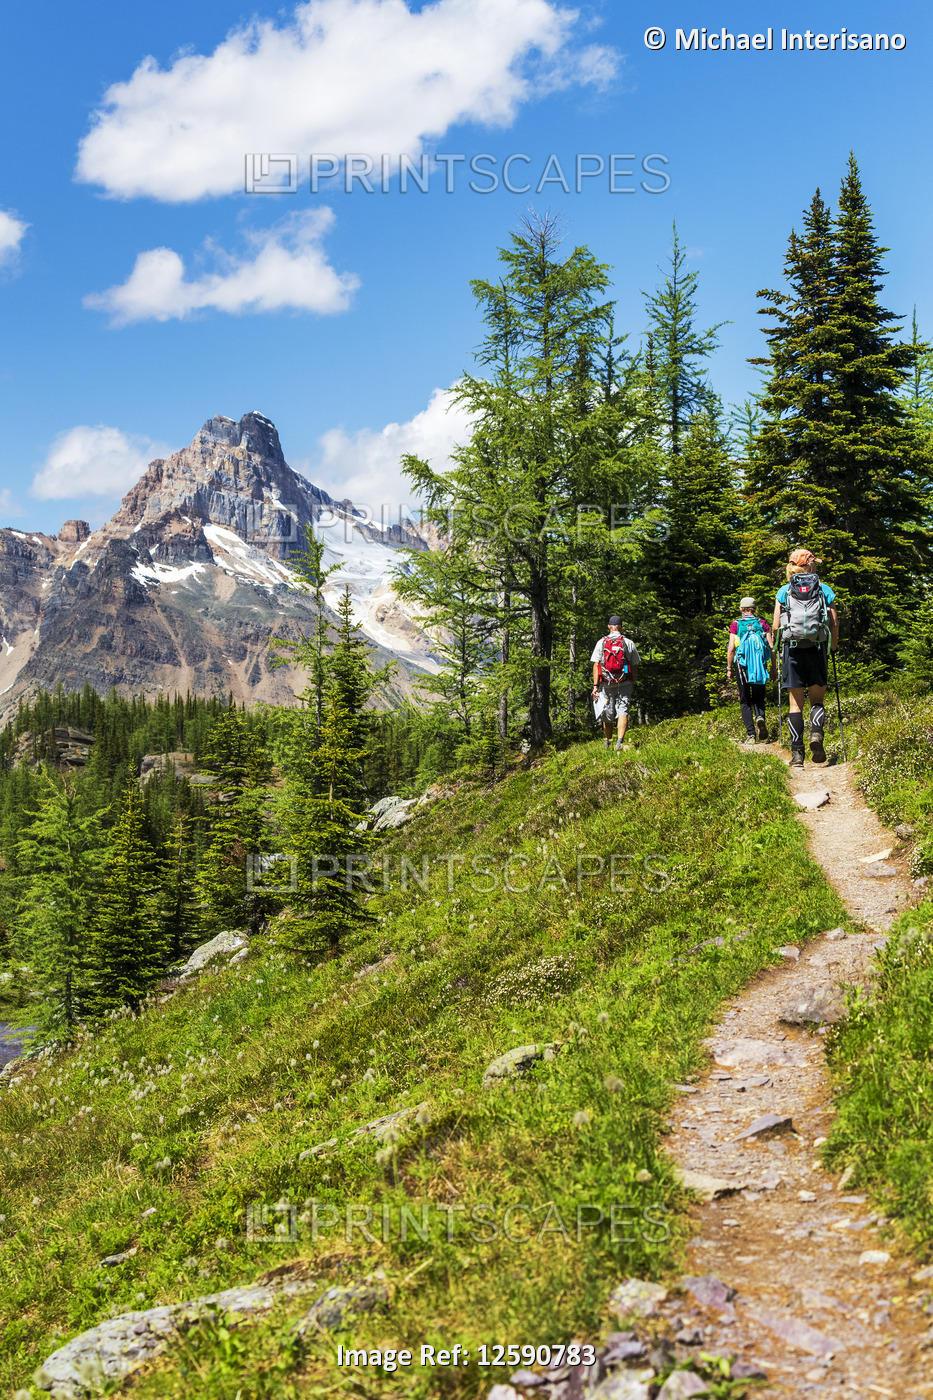 Hikers along a hilly mountain trail with mountain peak in the distance and blue ...